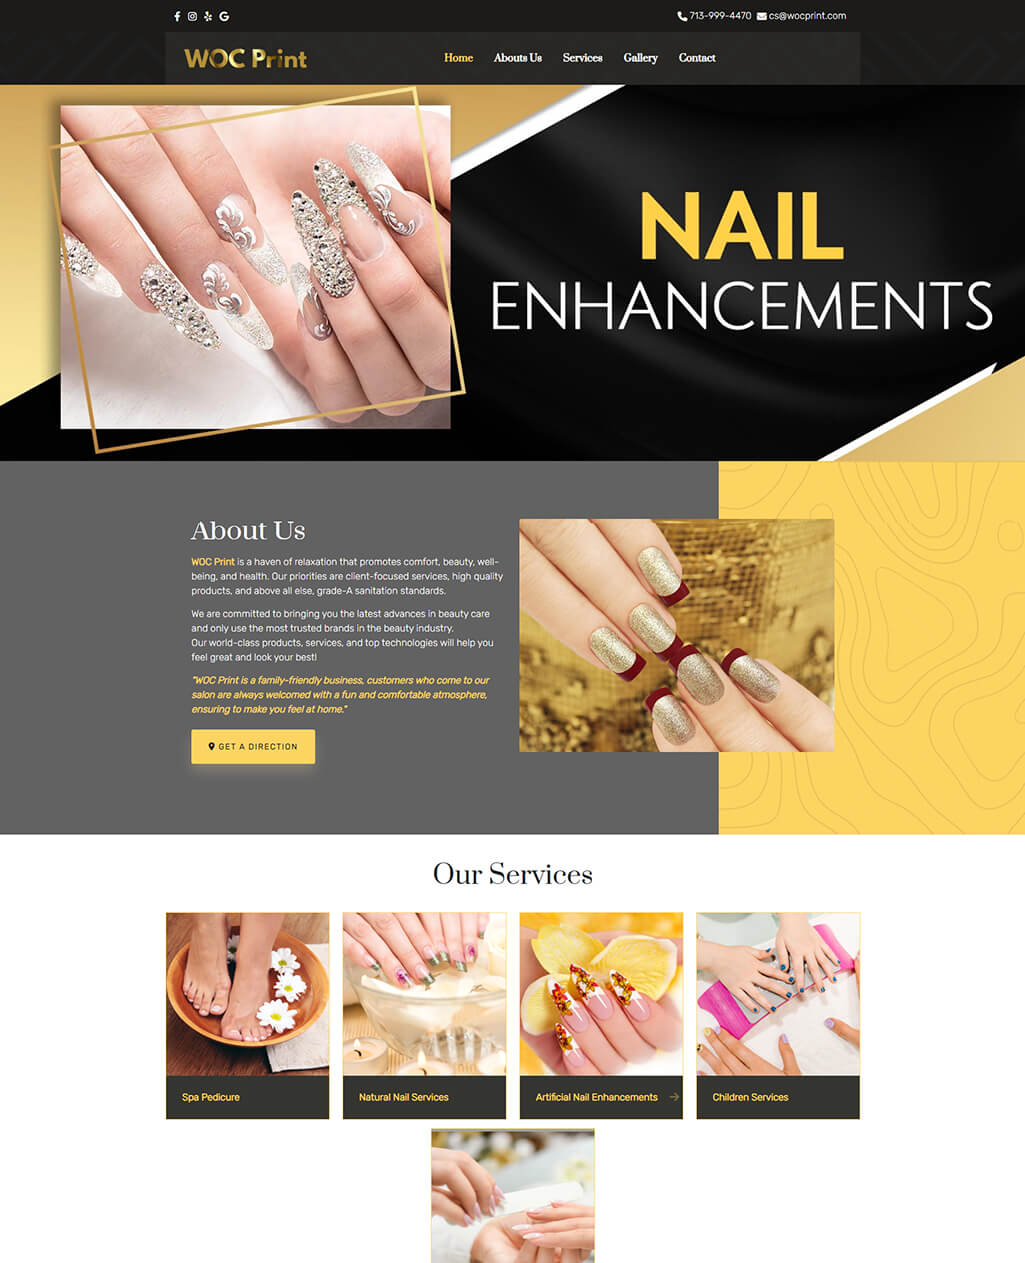 How To Make a Website for a Nail Salon - EASY & CHEAP! - YouTube